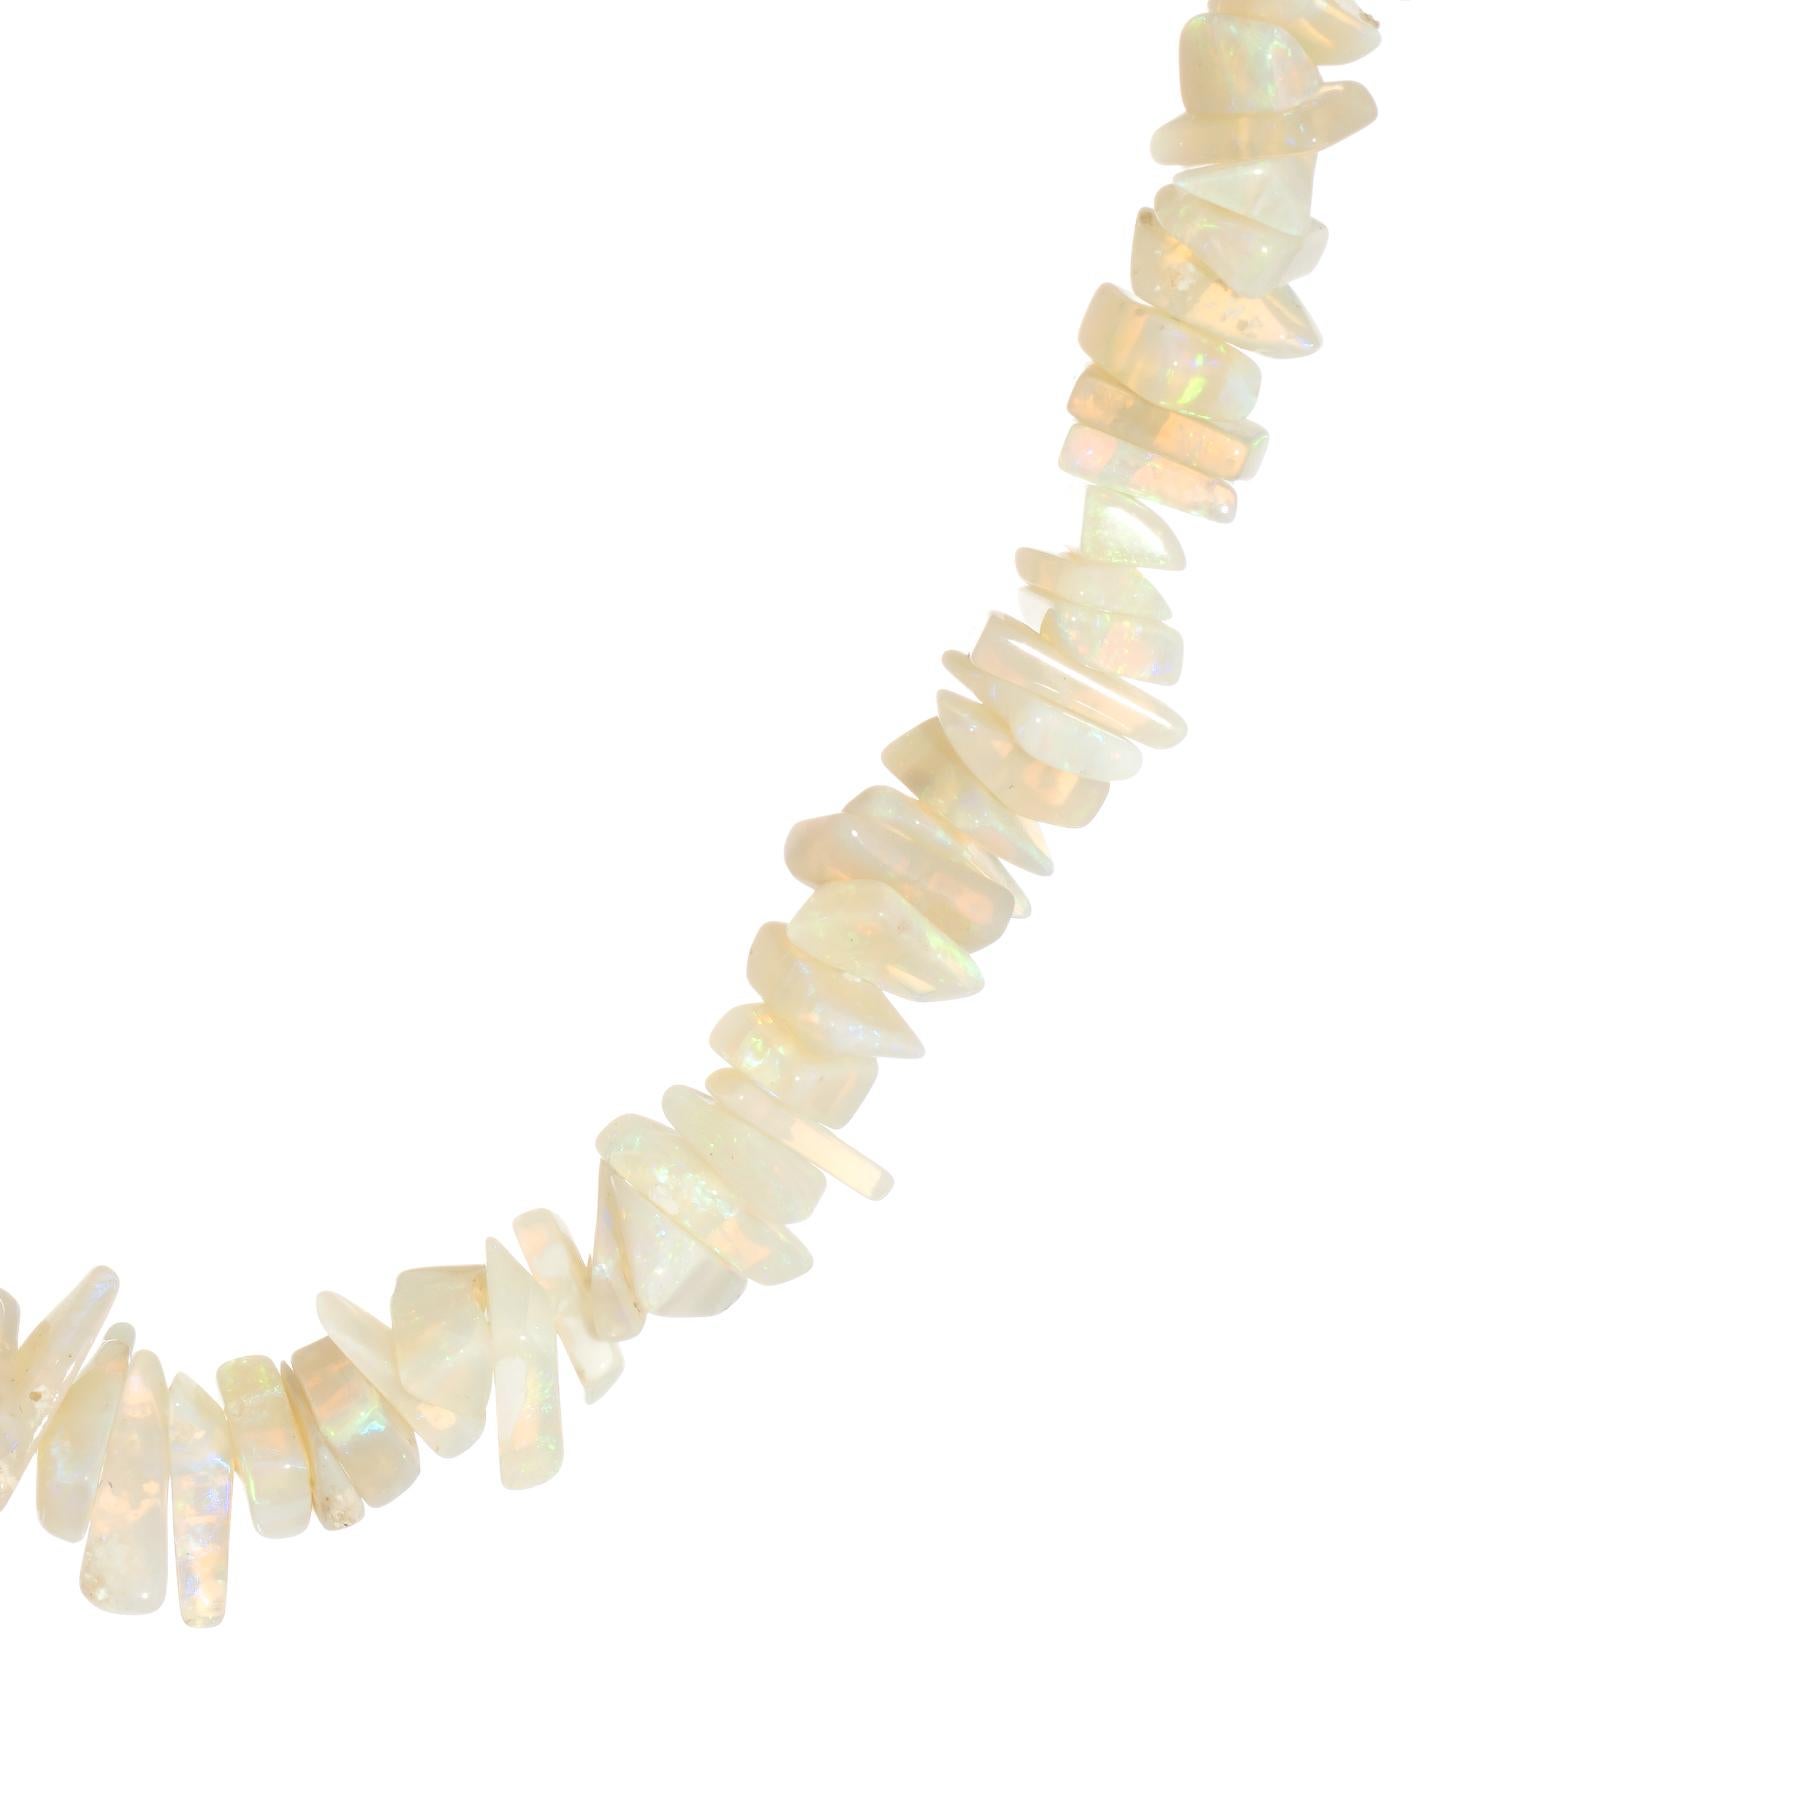 Elegant natural opal necklace, finished with a 14 karat yellow gold clasp.  

Natural opals are rough cut with a polished exterior surface. The opals measure from 5mm to 7mm. The opals exhibit a nice play of color from green to purple, turquoise,